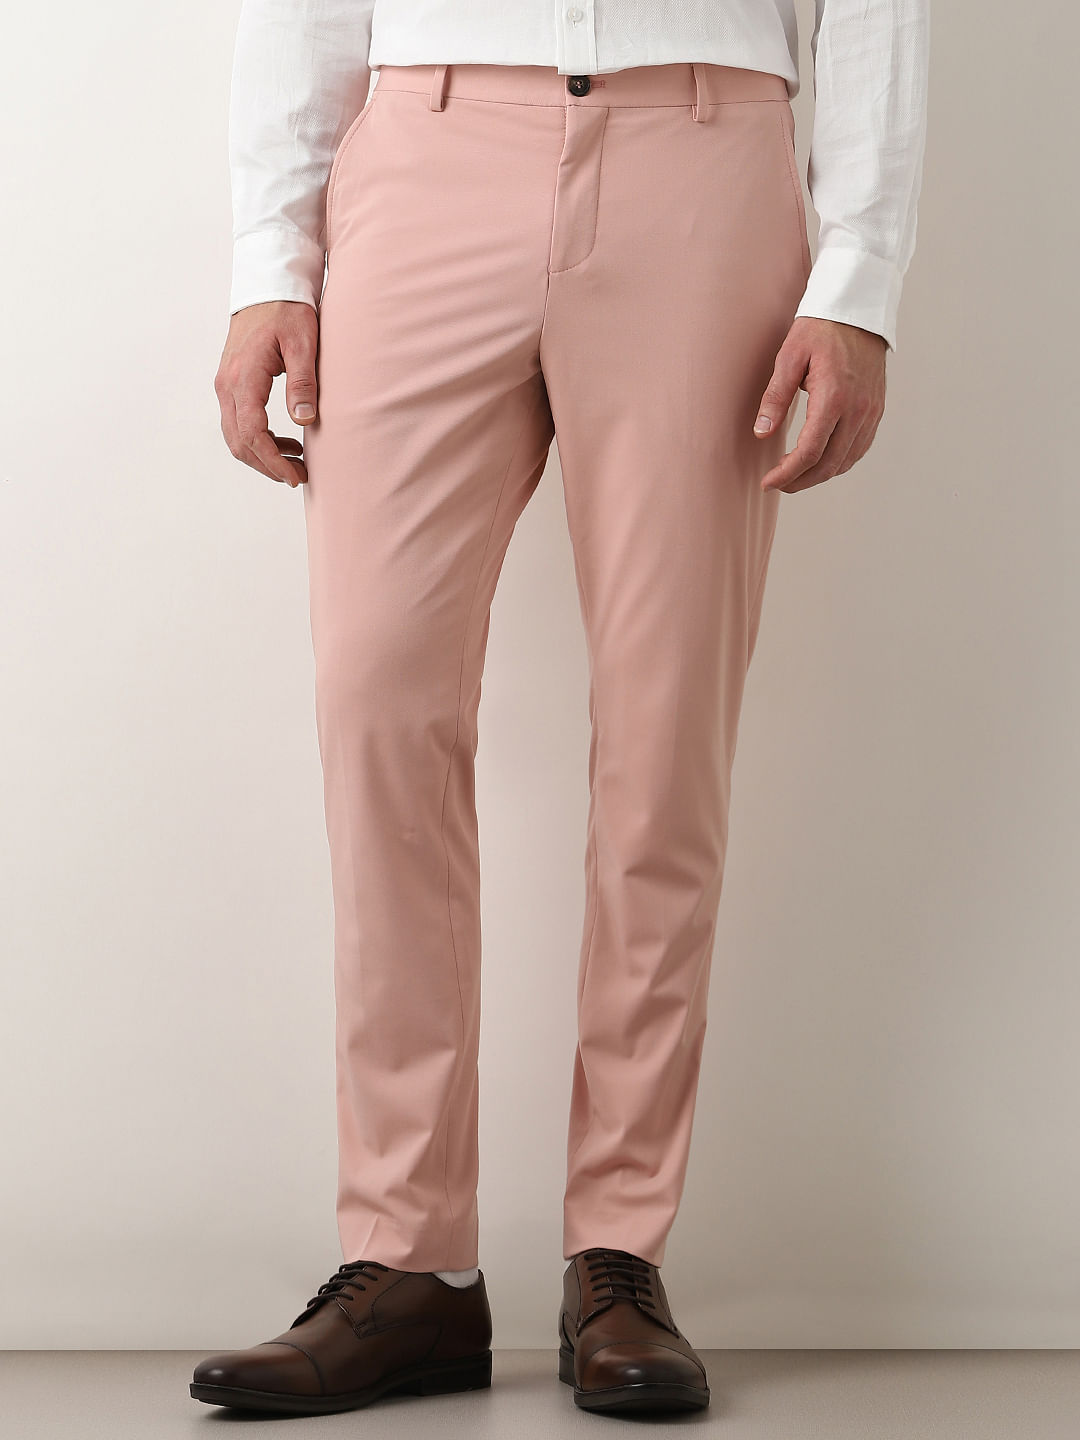 Stradivarius belted tailored pants in pink | ASOS | Tailored trousers,  Tailored pants, Pants